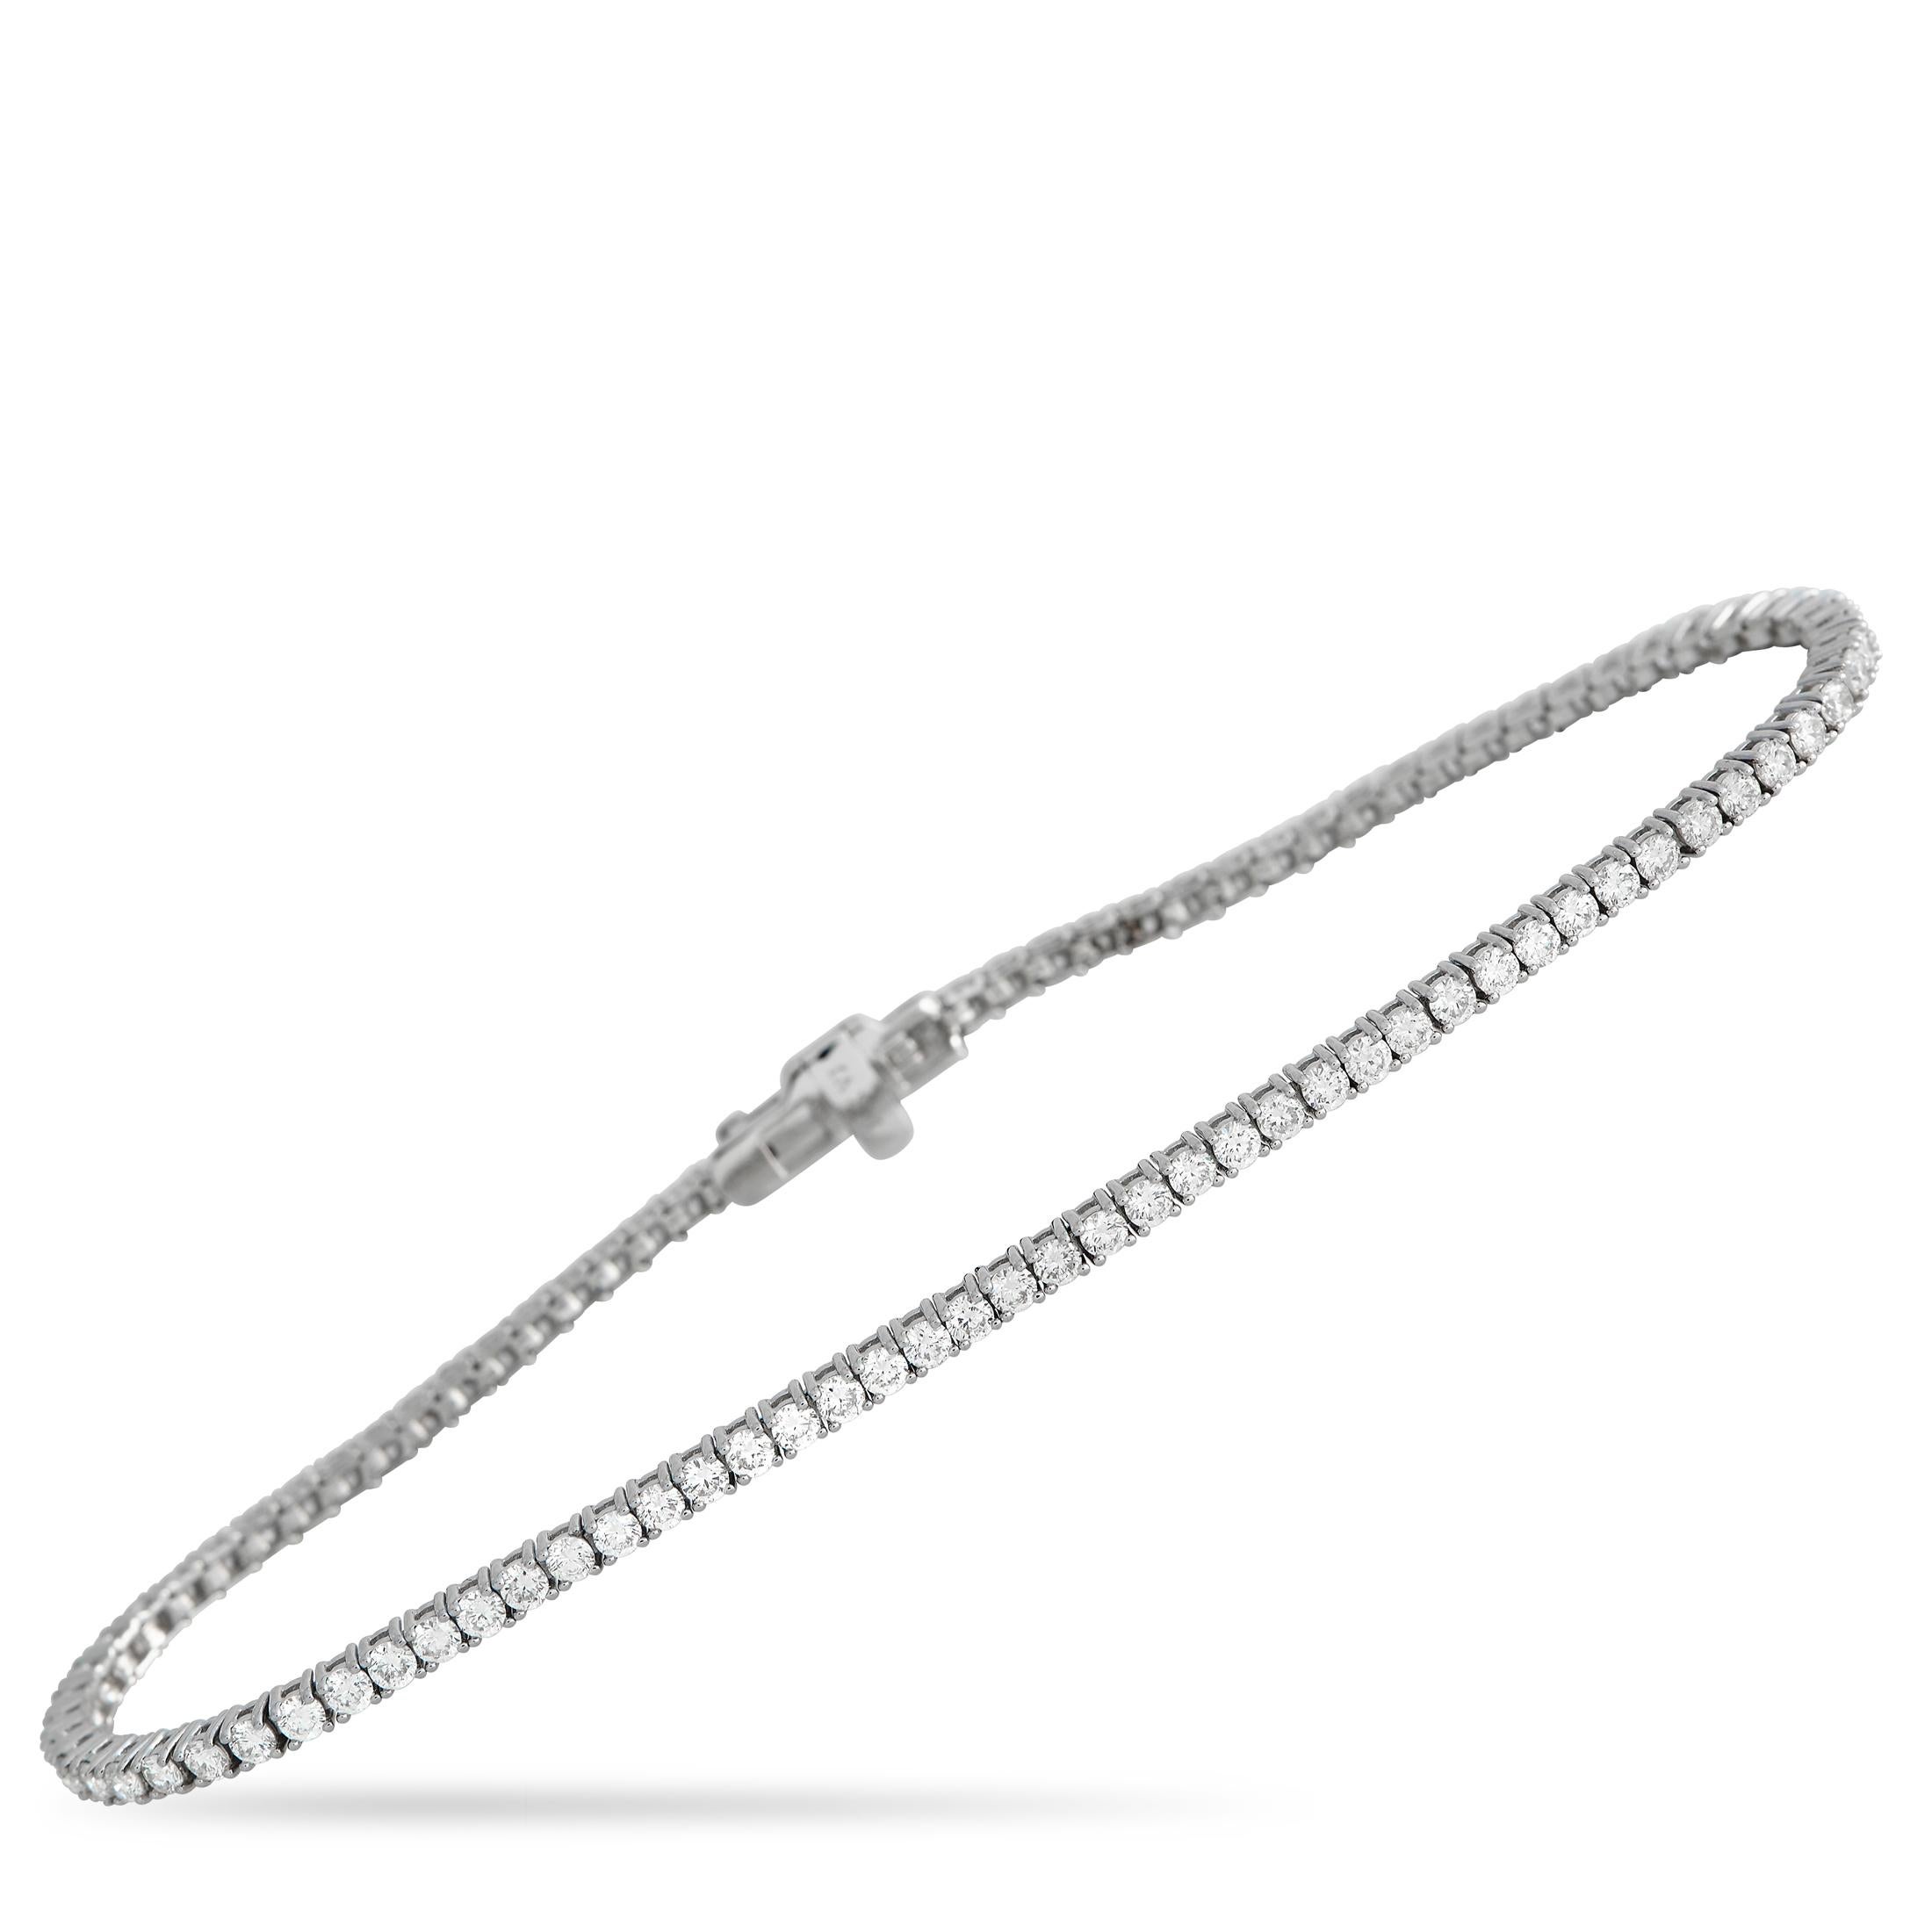 Mark a special day with the beautiful sparkle of this LB Exclusive 14K White Gold 2.51 ct Diamond Tennis Bracelet. The 7.25-inch long bracelet is lined with 1.81 carats of white diamonds. A box tab secures this glittering piece to the wrist. 

This